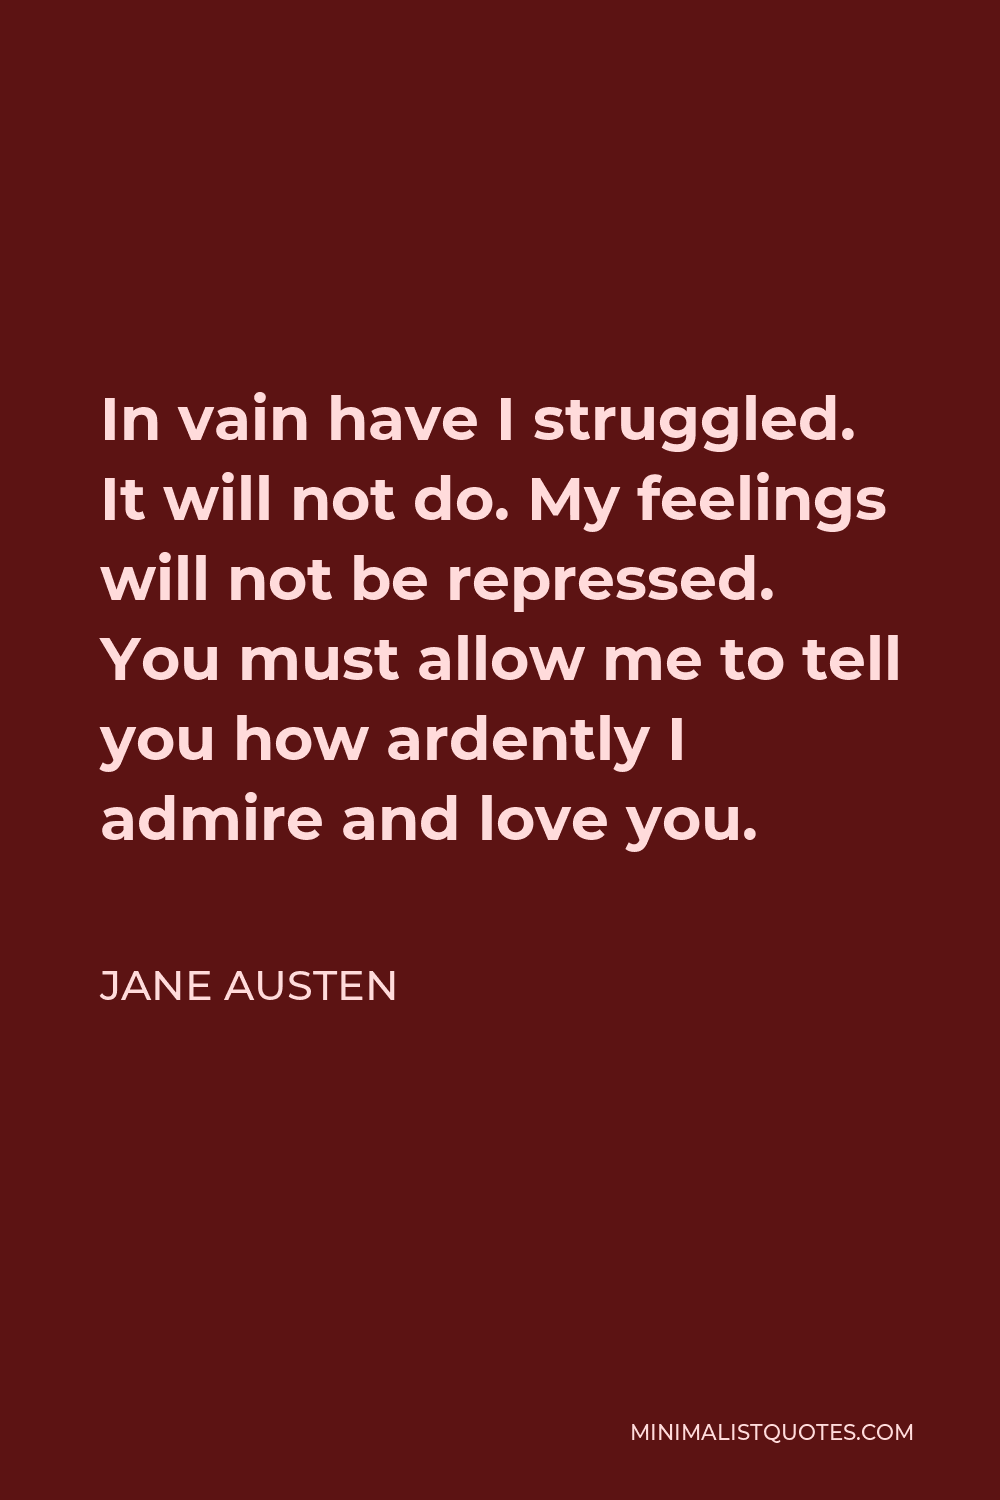 Jane Austen Quote - In vain have I struggled. It will not do. My feelings will not be repressed. You must allow me to tell you how ardently I admire and love you.